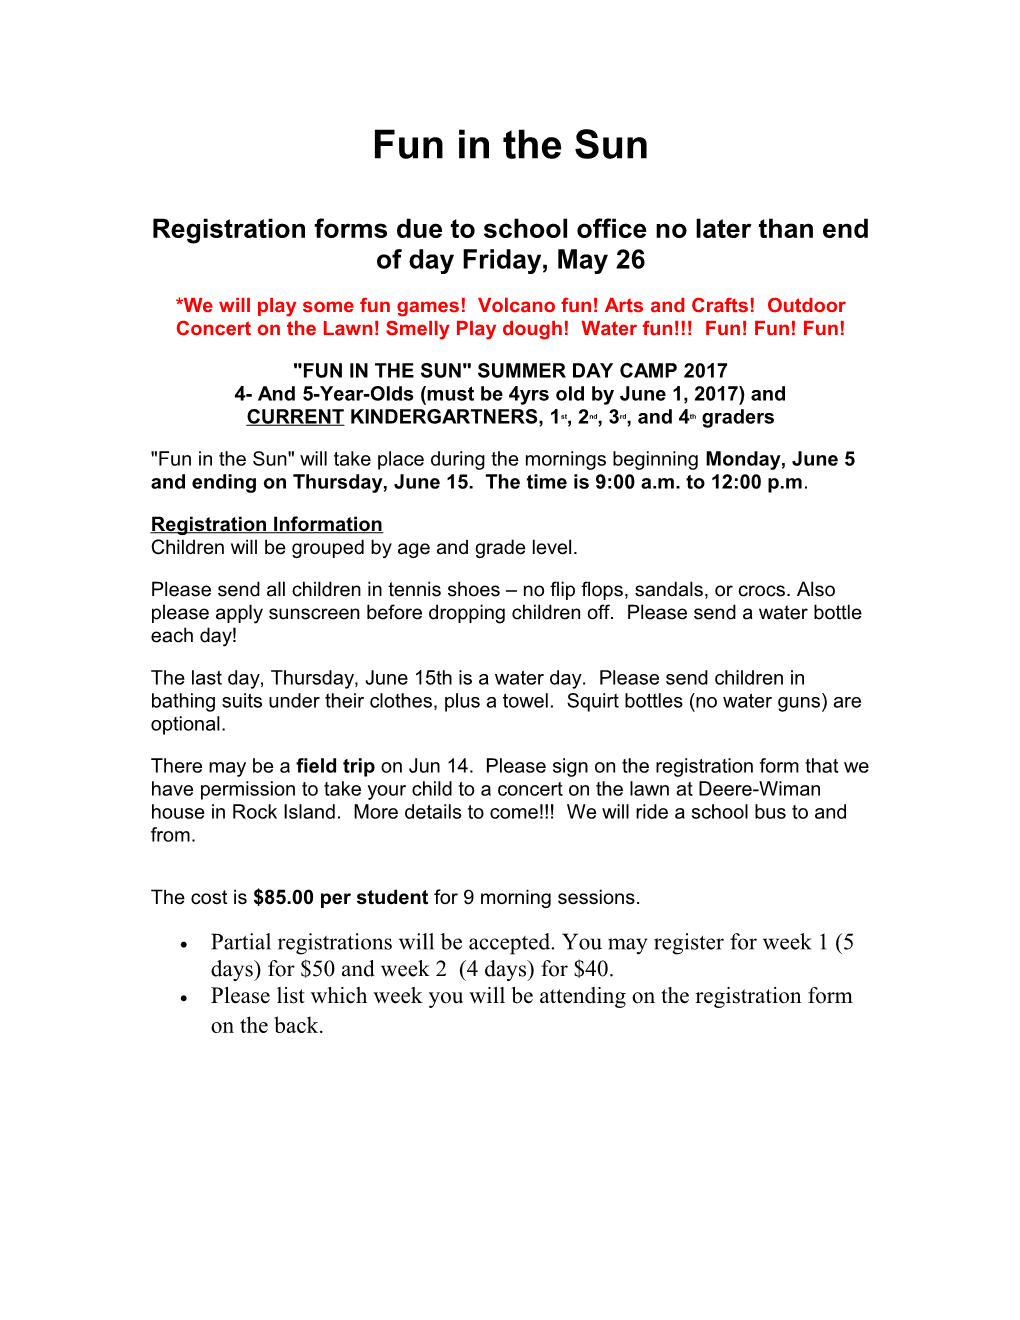 Registration Forms Due to School Office No Later Than End of Day Friday, May 26